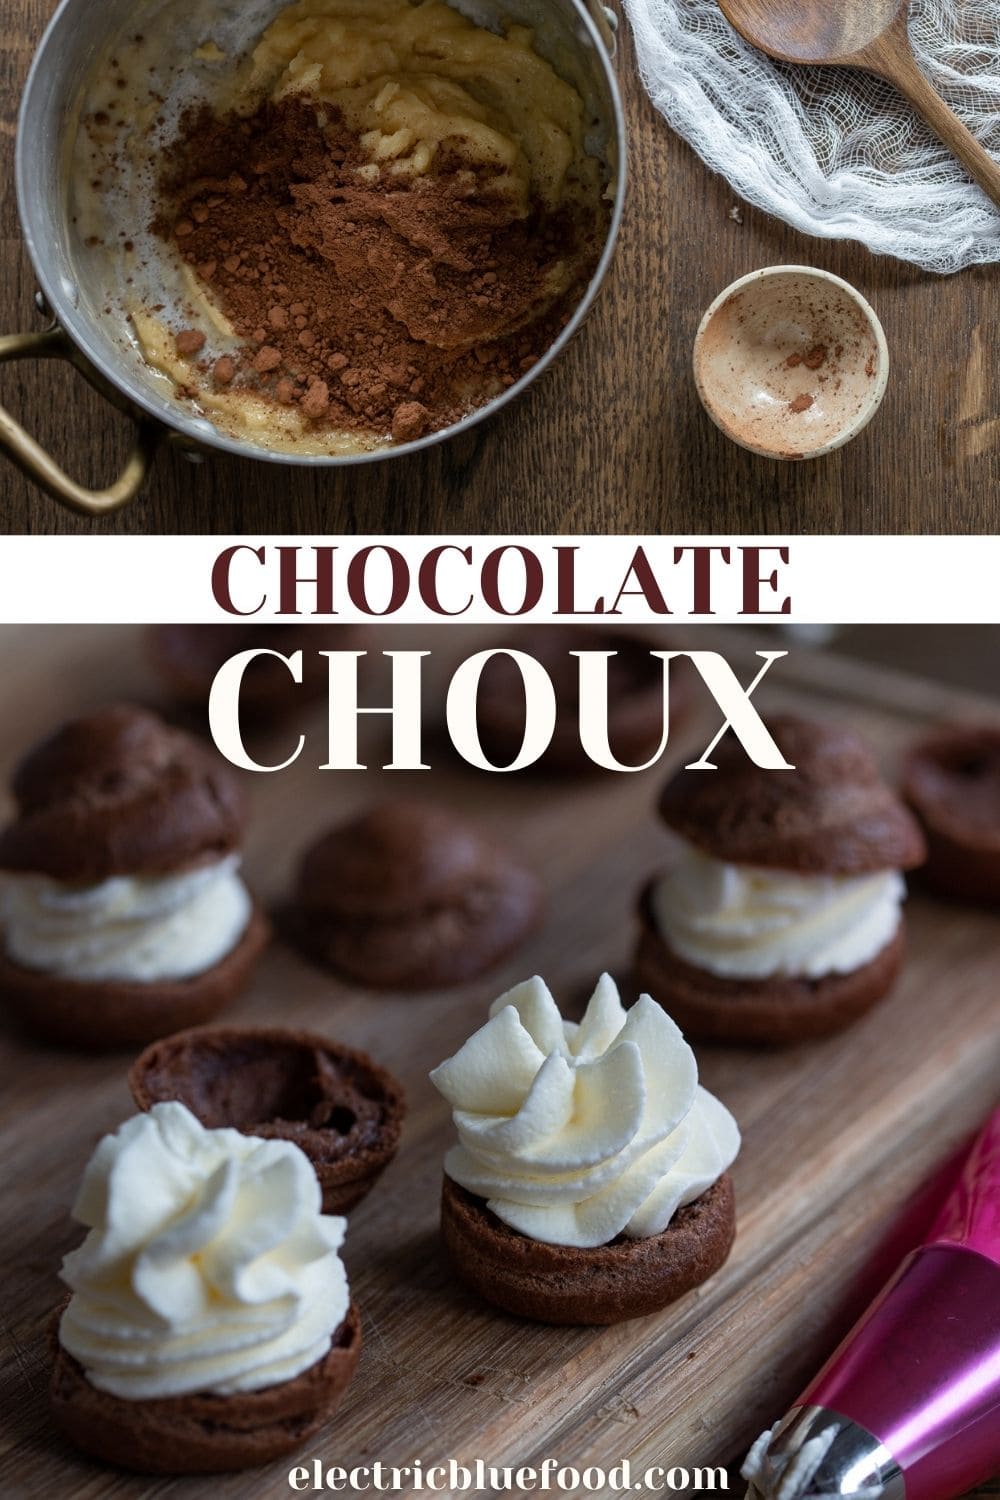 Homemade cocoa choux pastry buns filled with cream to make delicious chocolate cream puffs.